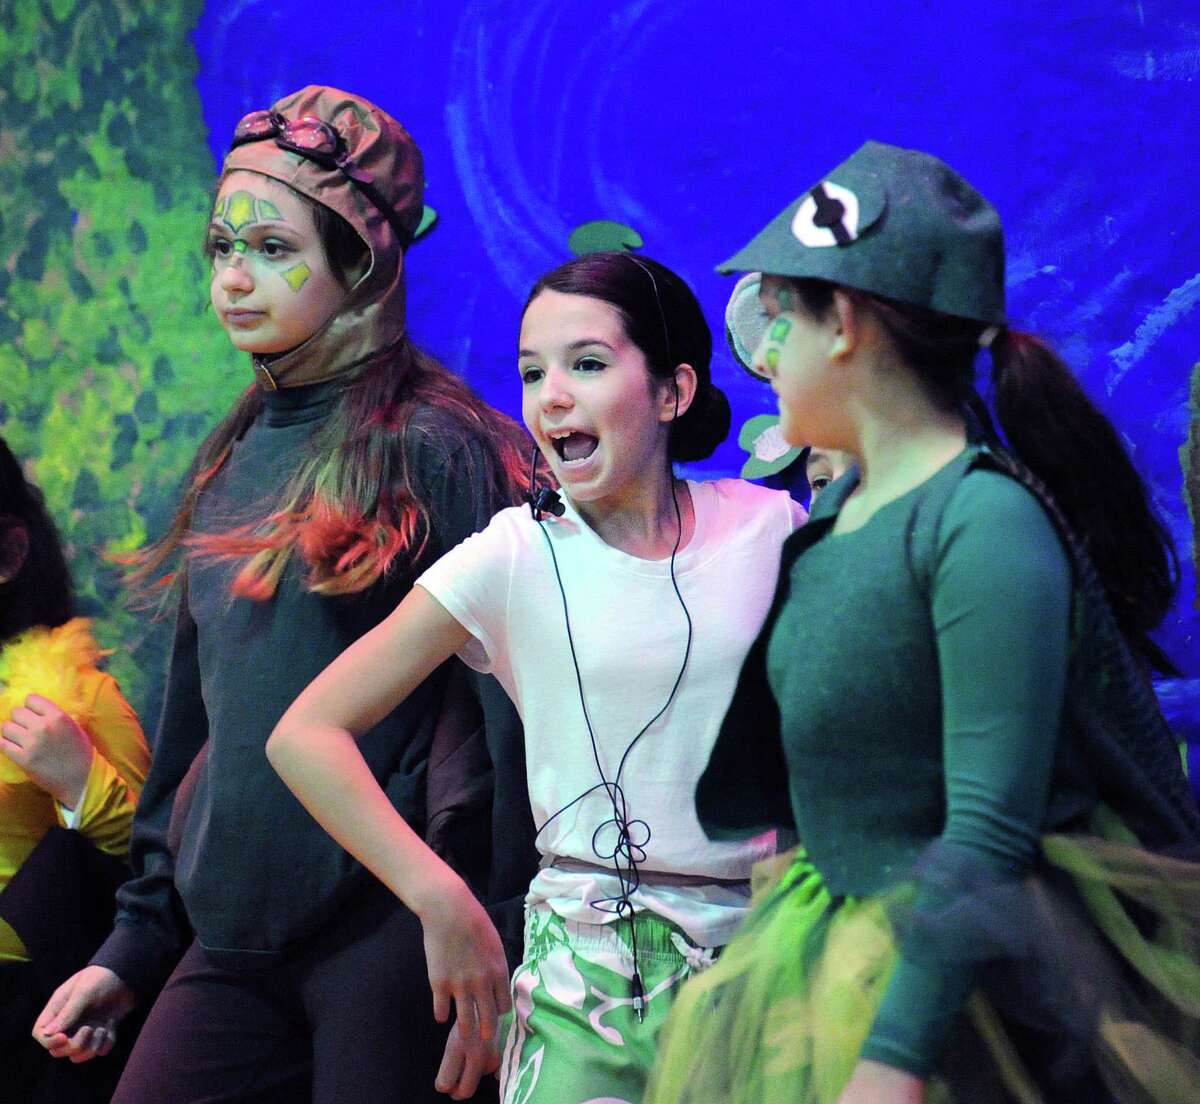 Brenda Galbier, center, played the frog during the New Lebanon School 4th & 5th grade students opening night performance of the play "A Year with Frog & Toad" at the school in Greenwich, Conn., At Thursday, March 9, 2017. Galbier is a 5th grade student at the school. New Lebanon School teacher Carol Pugliano, the director of the production, said about 29 "enthusiastic" students participated in the play that is based on the musical that was written by brothers Robert and Willie Reale and the book was illustrated by Arnold Lobel. The performance took place to a standing-room-only crowd of roughly 100 people in the school's gymnasium.